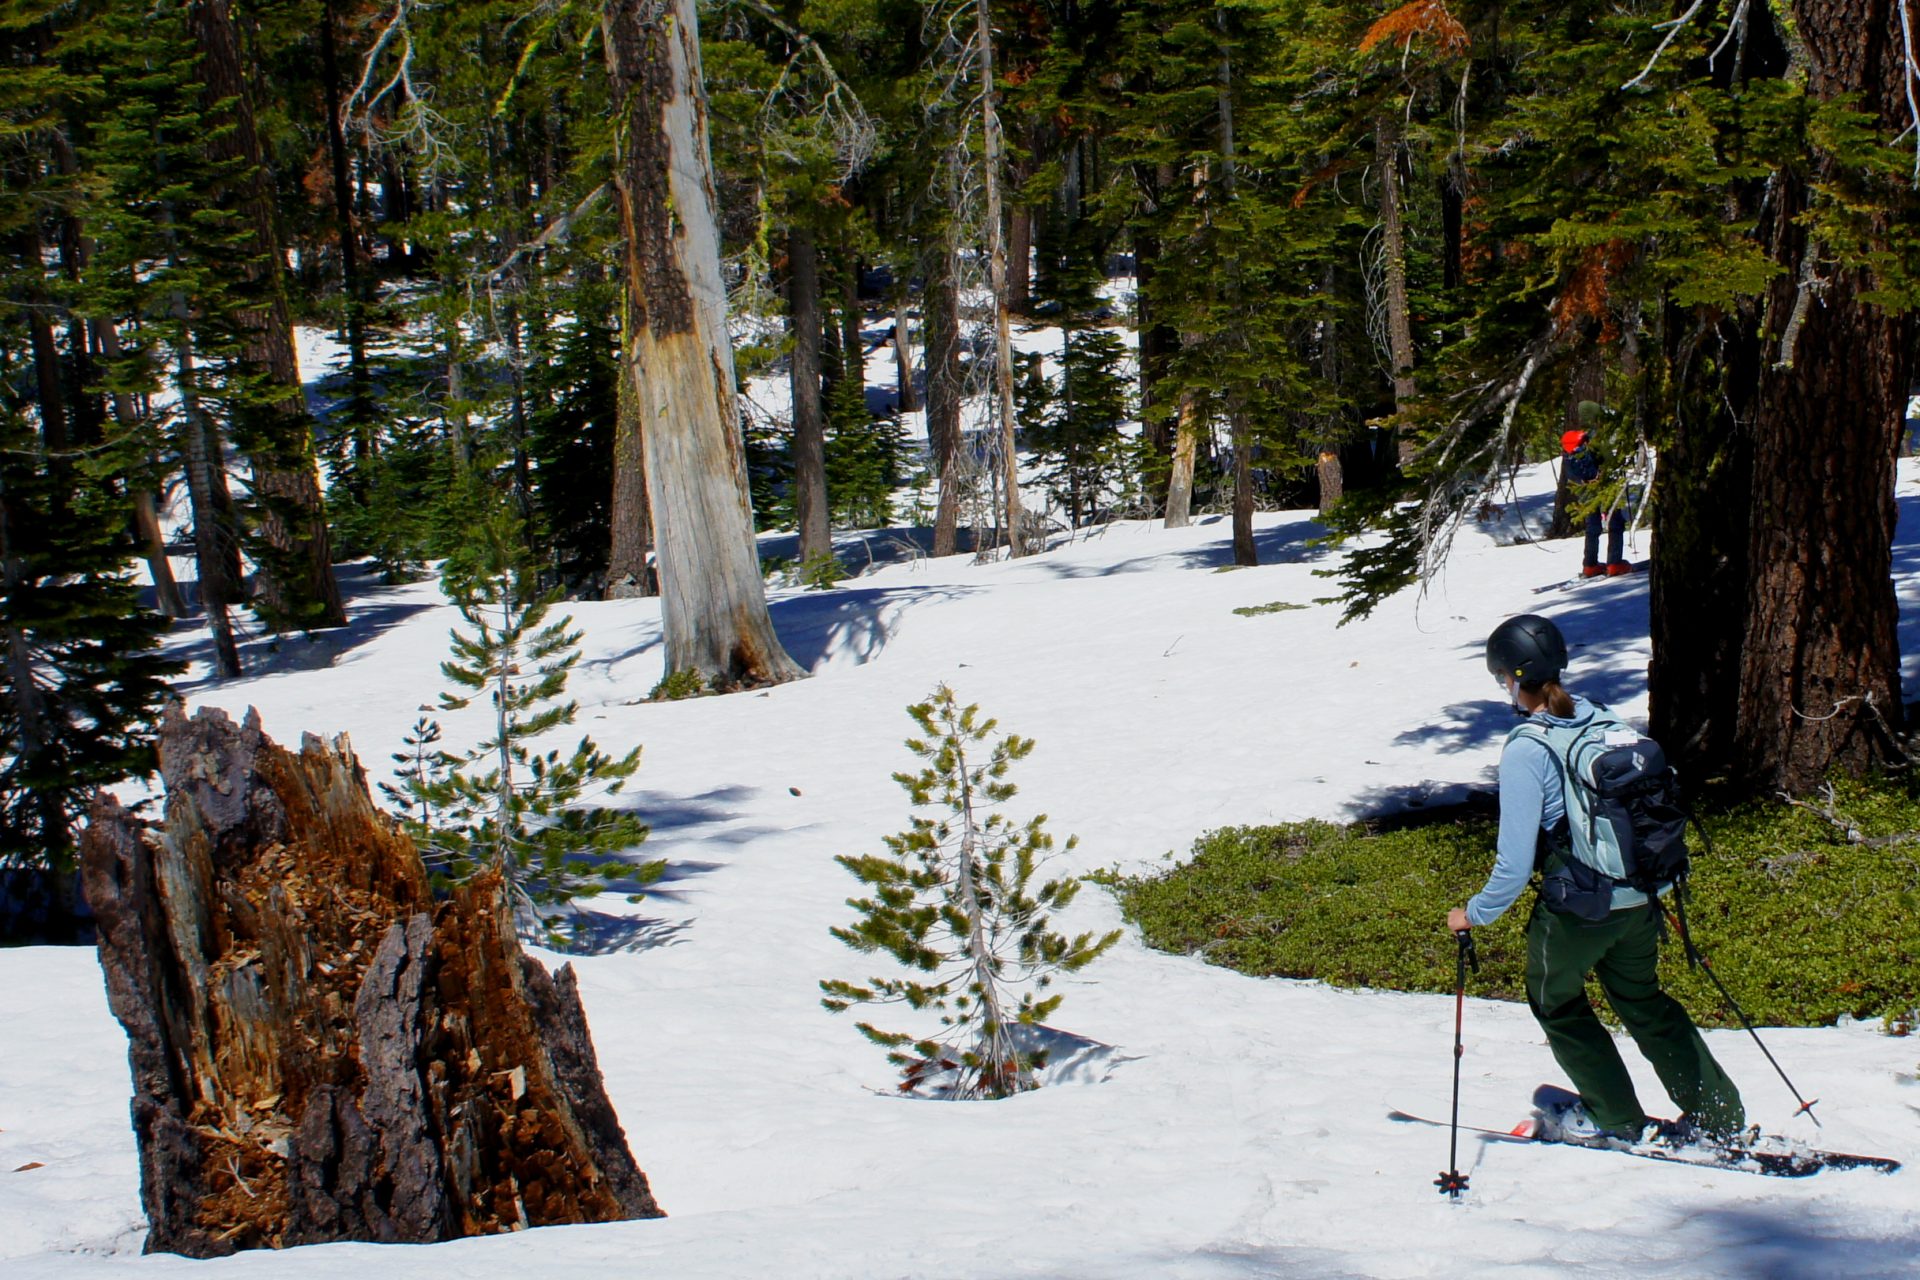 skier navigating tight trees with green plants peeking through a thin snowpack